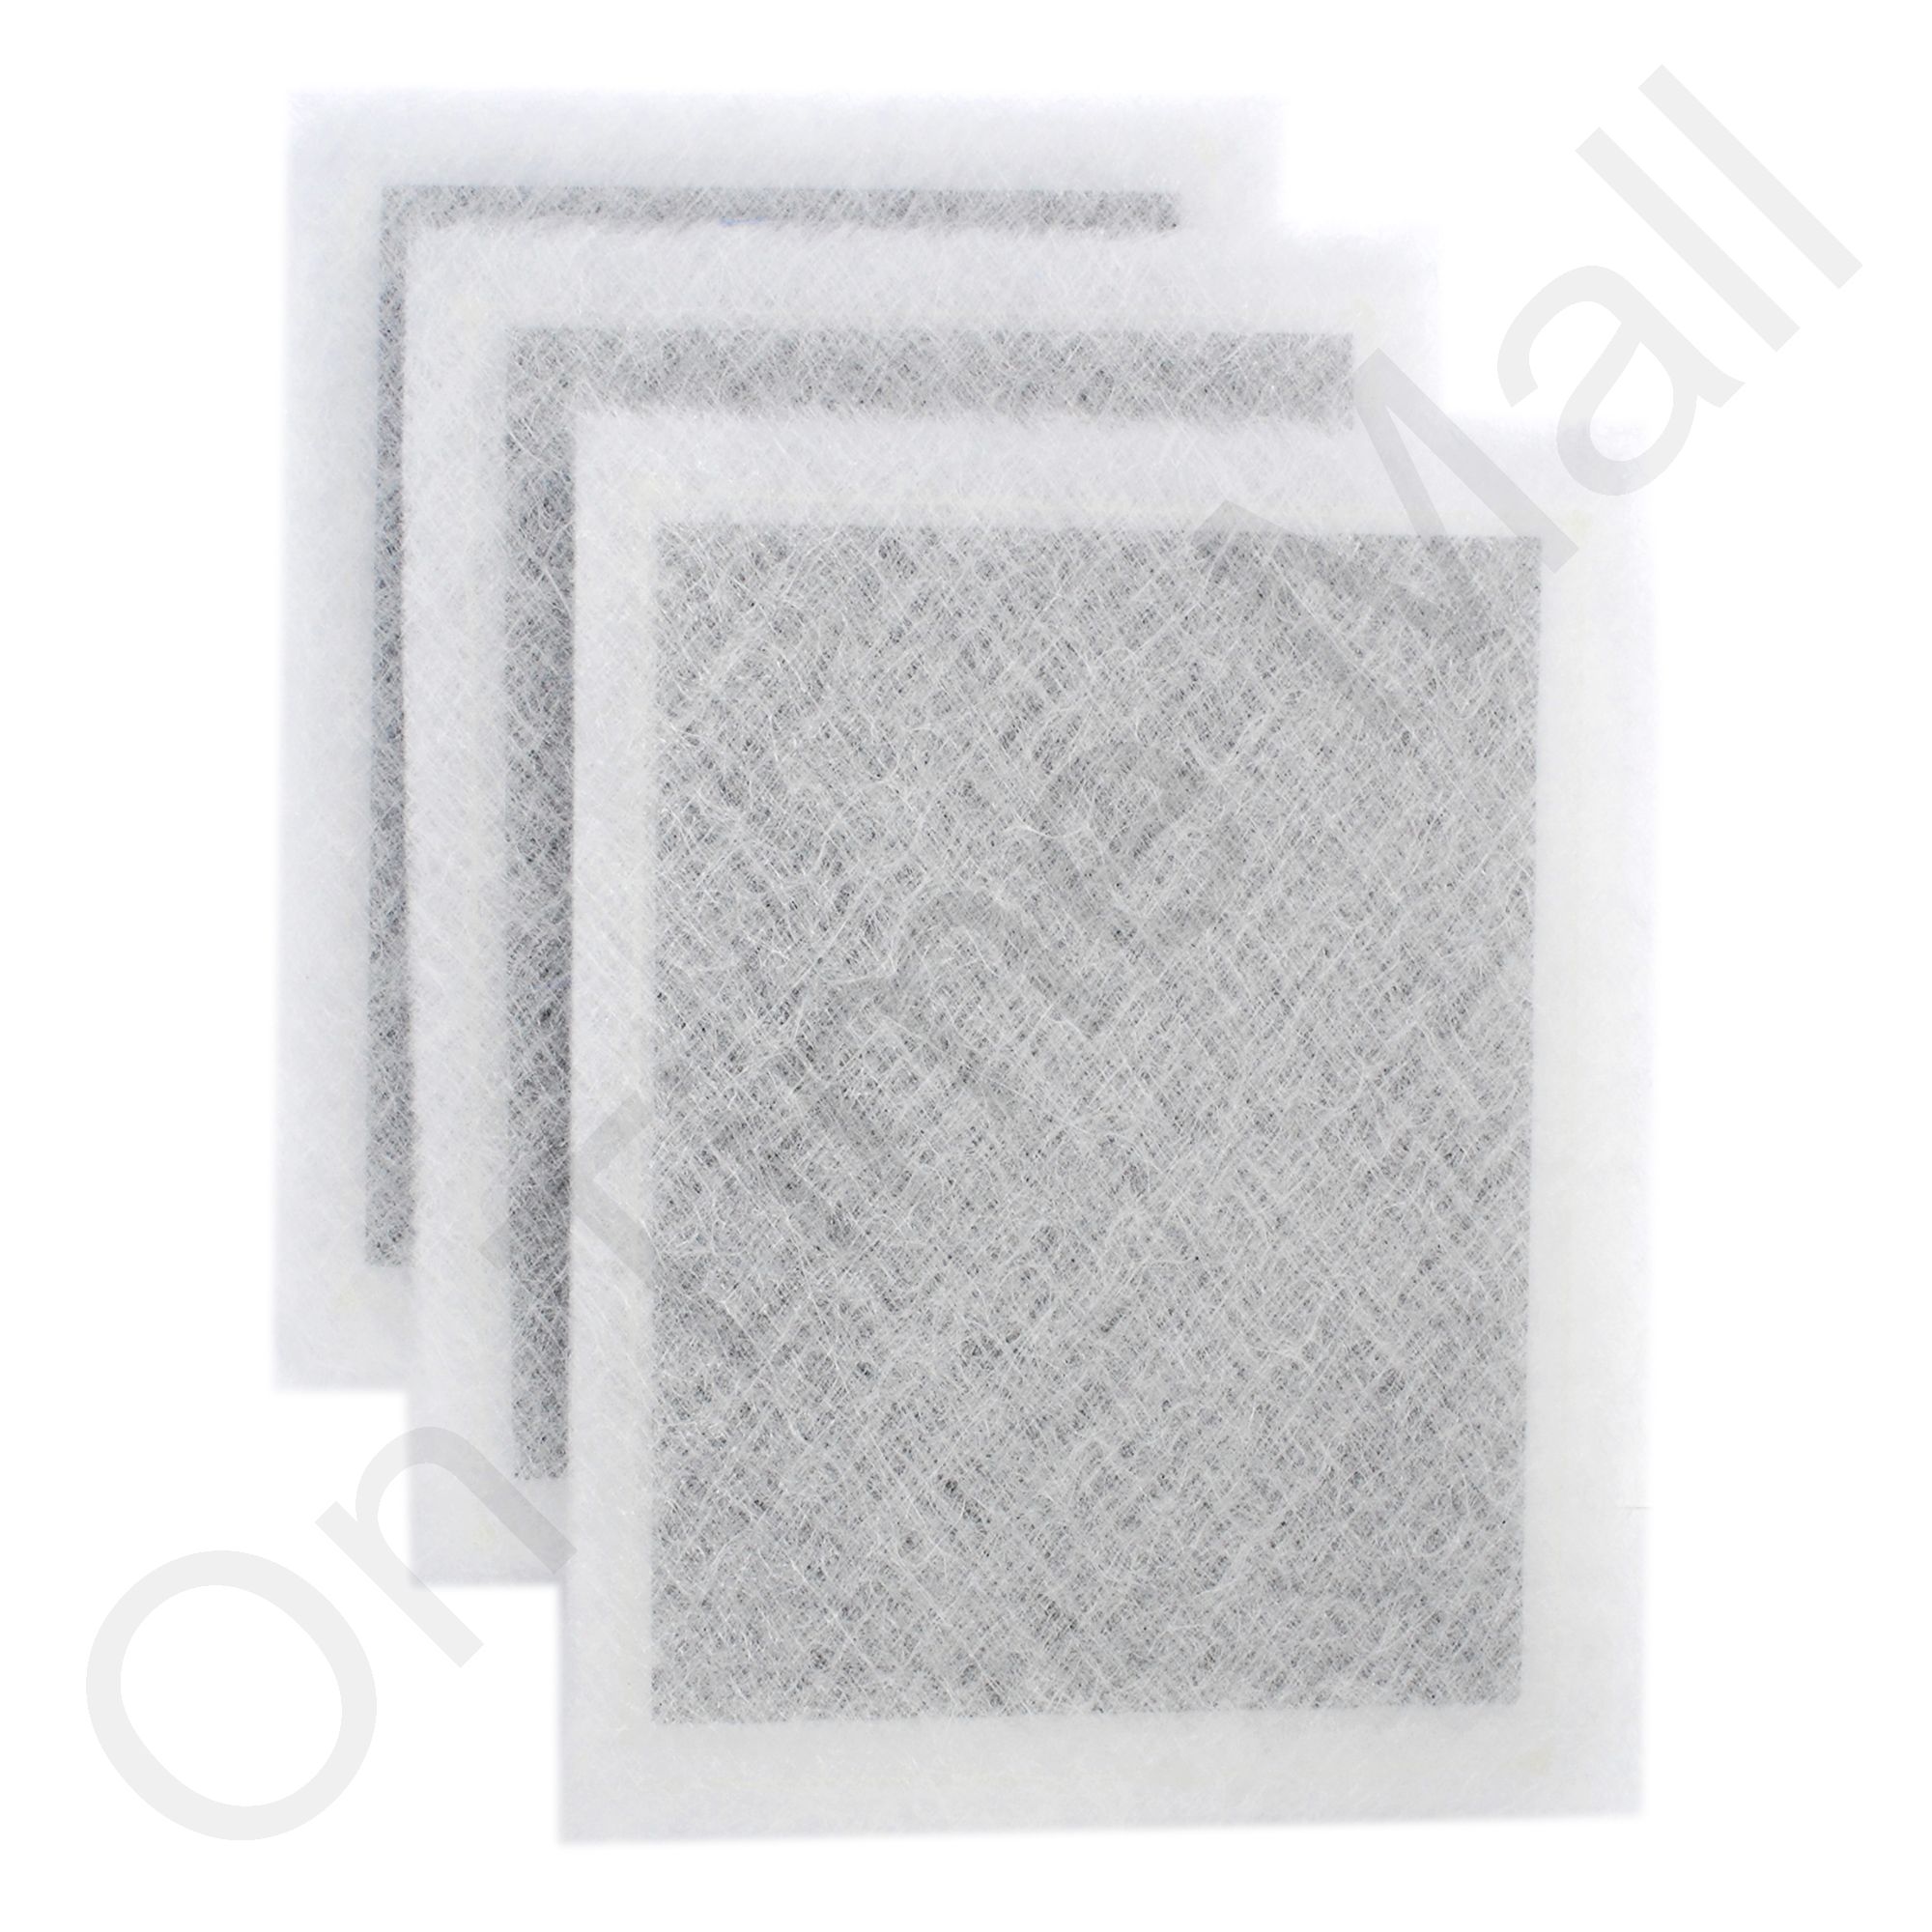 RayAir Supply Dynamic CT500 Air Filter Replacement Filter Pads C3PCT500 3 Pack 